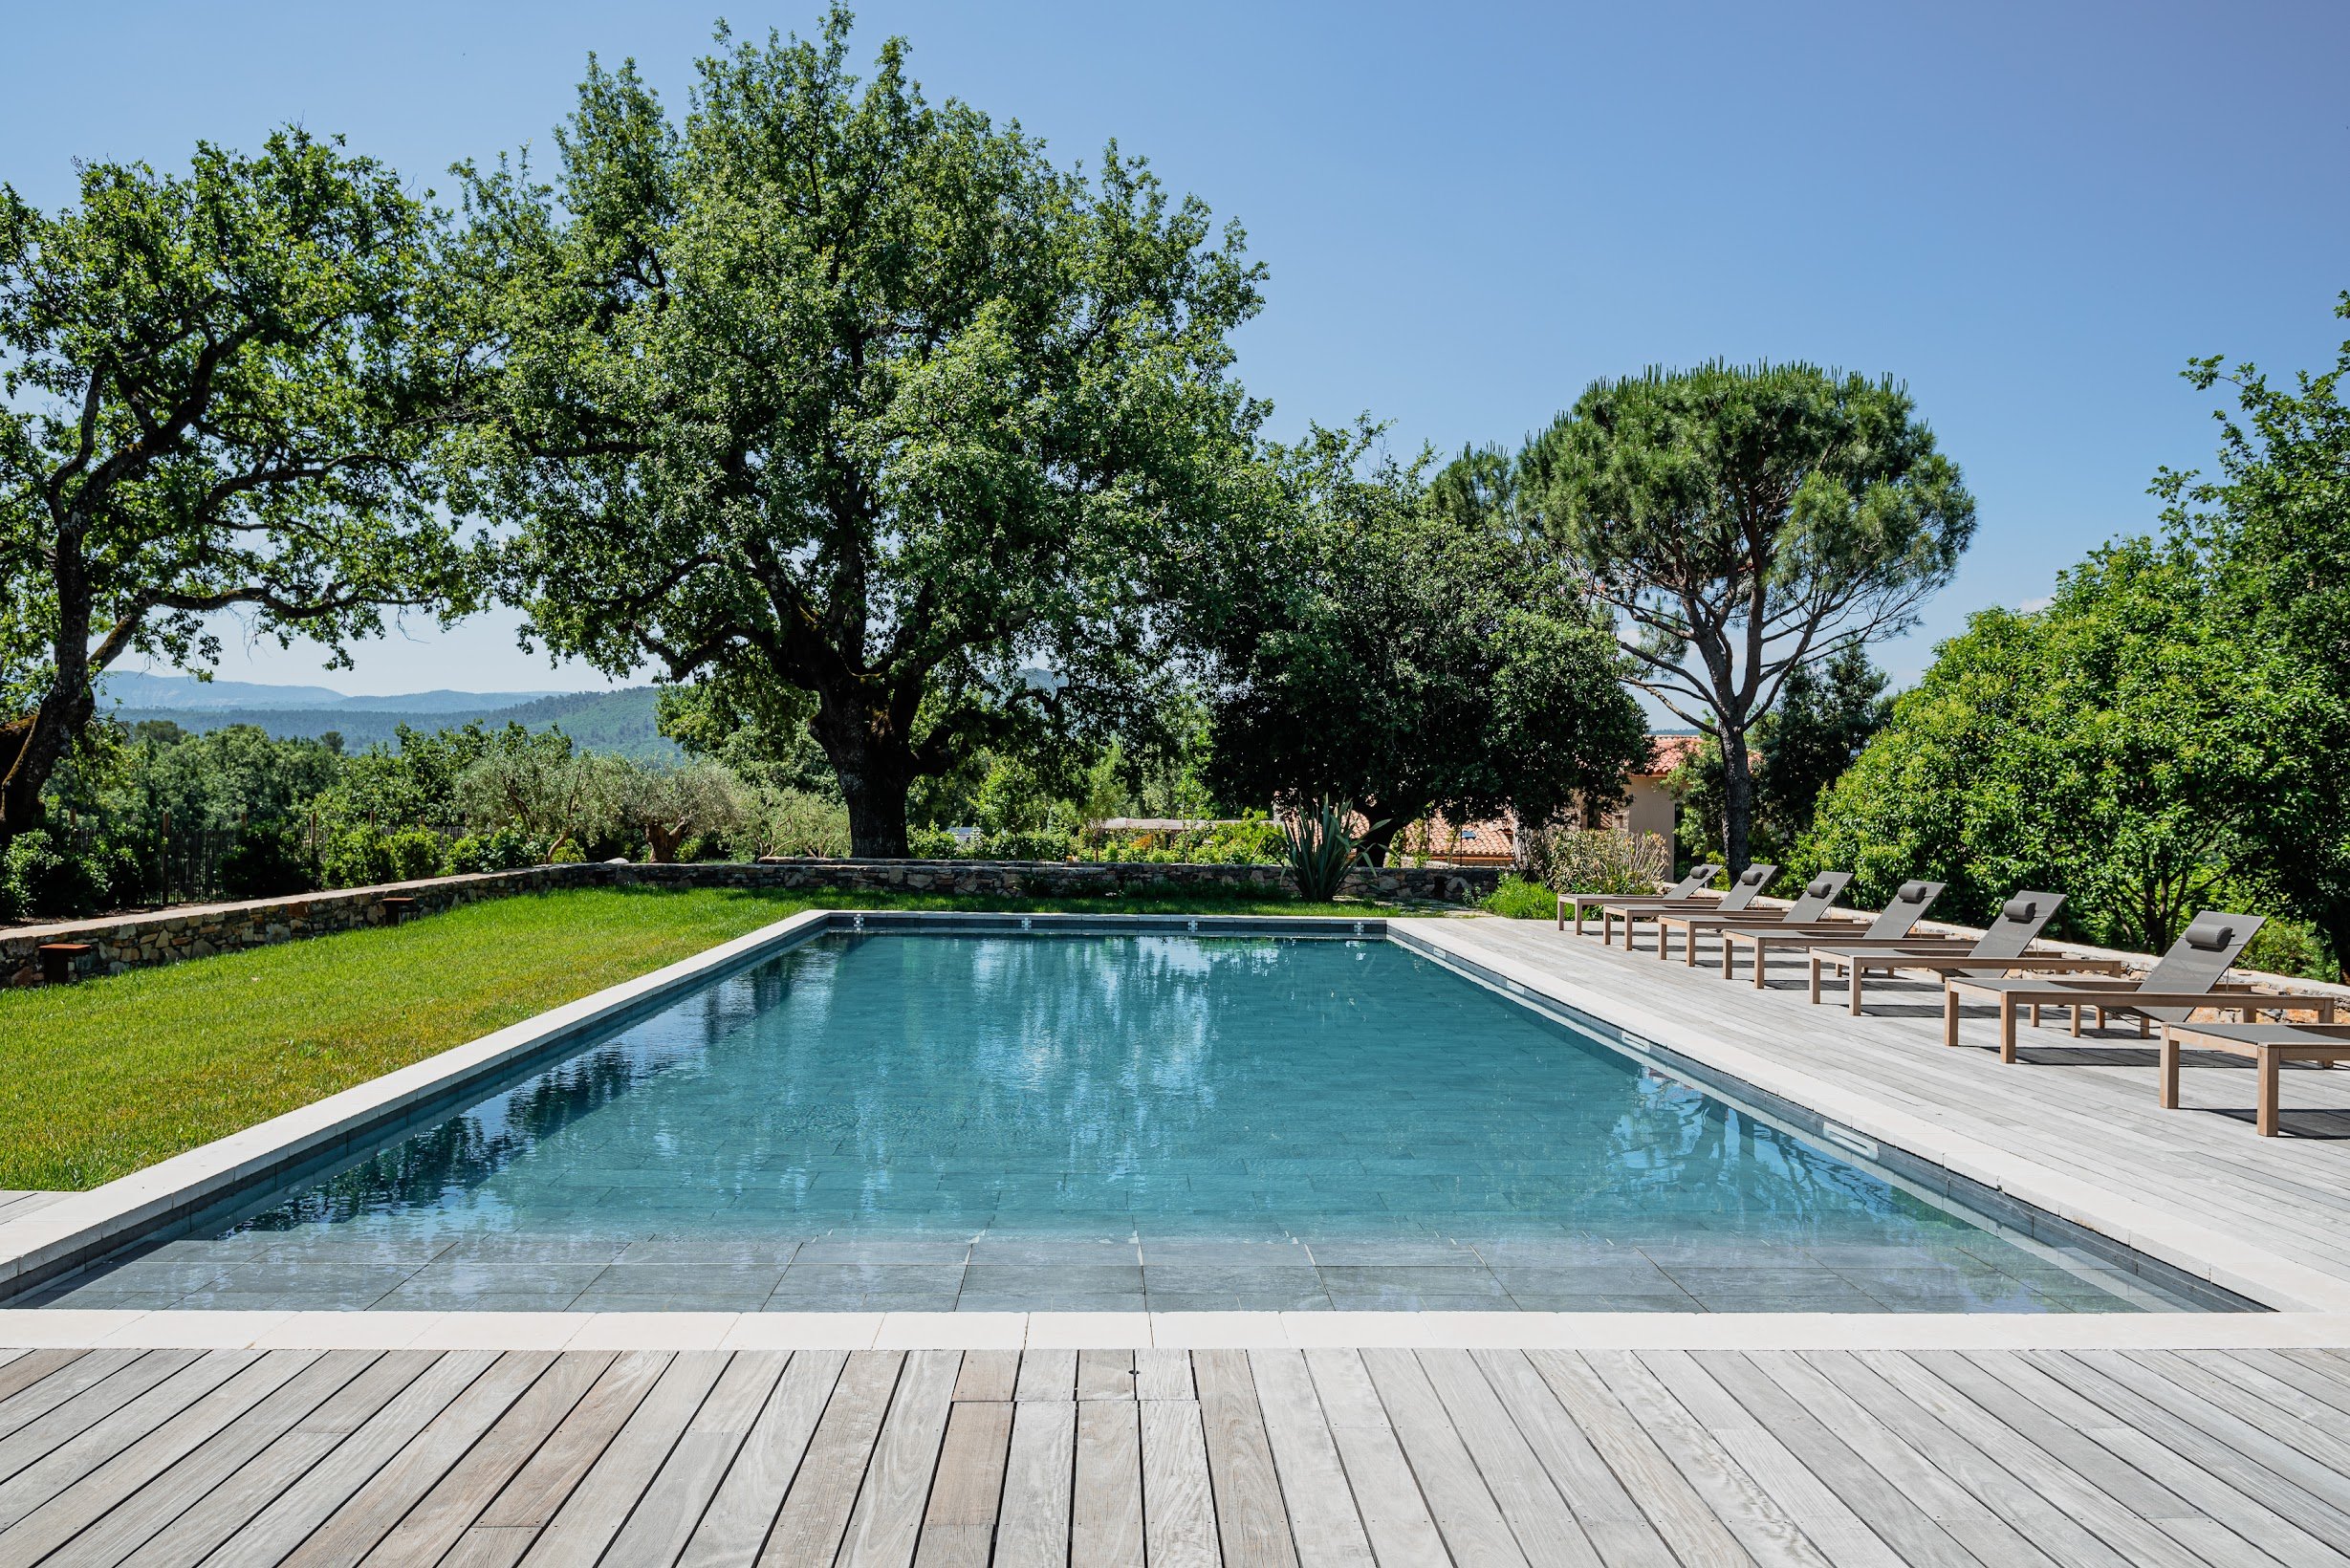 Swimming pool and tennis court on a luxury wine estate